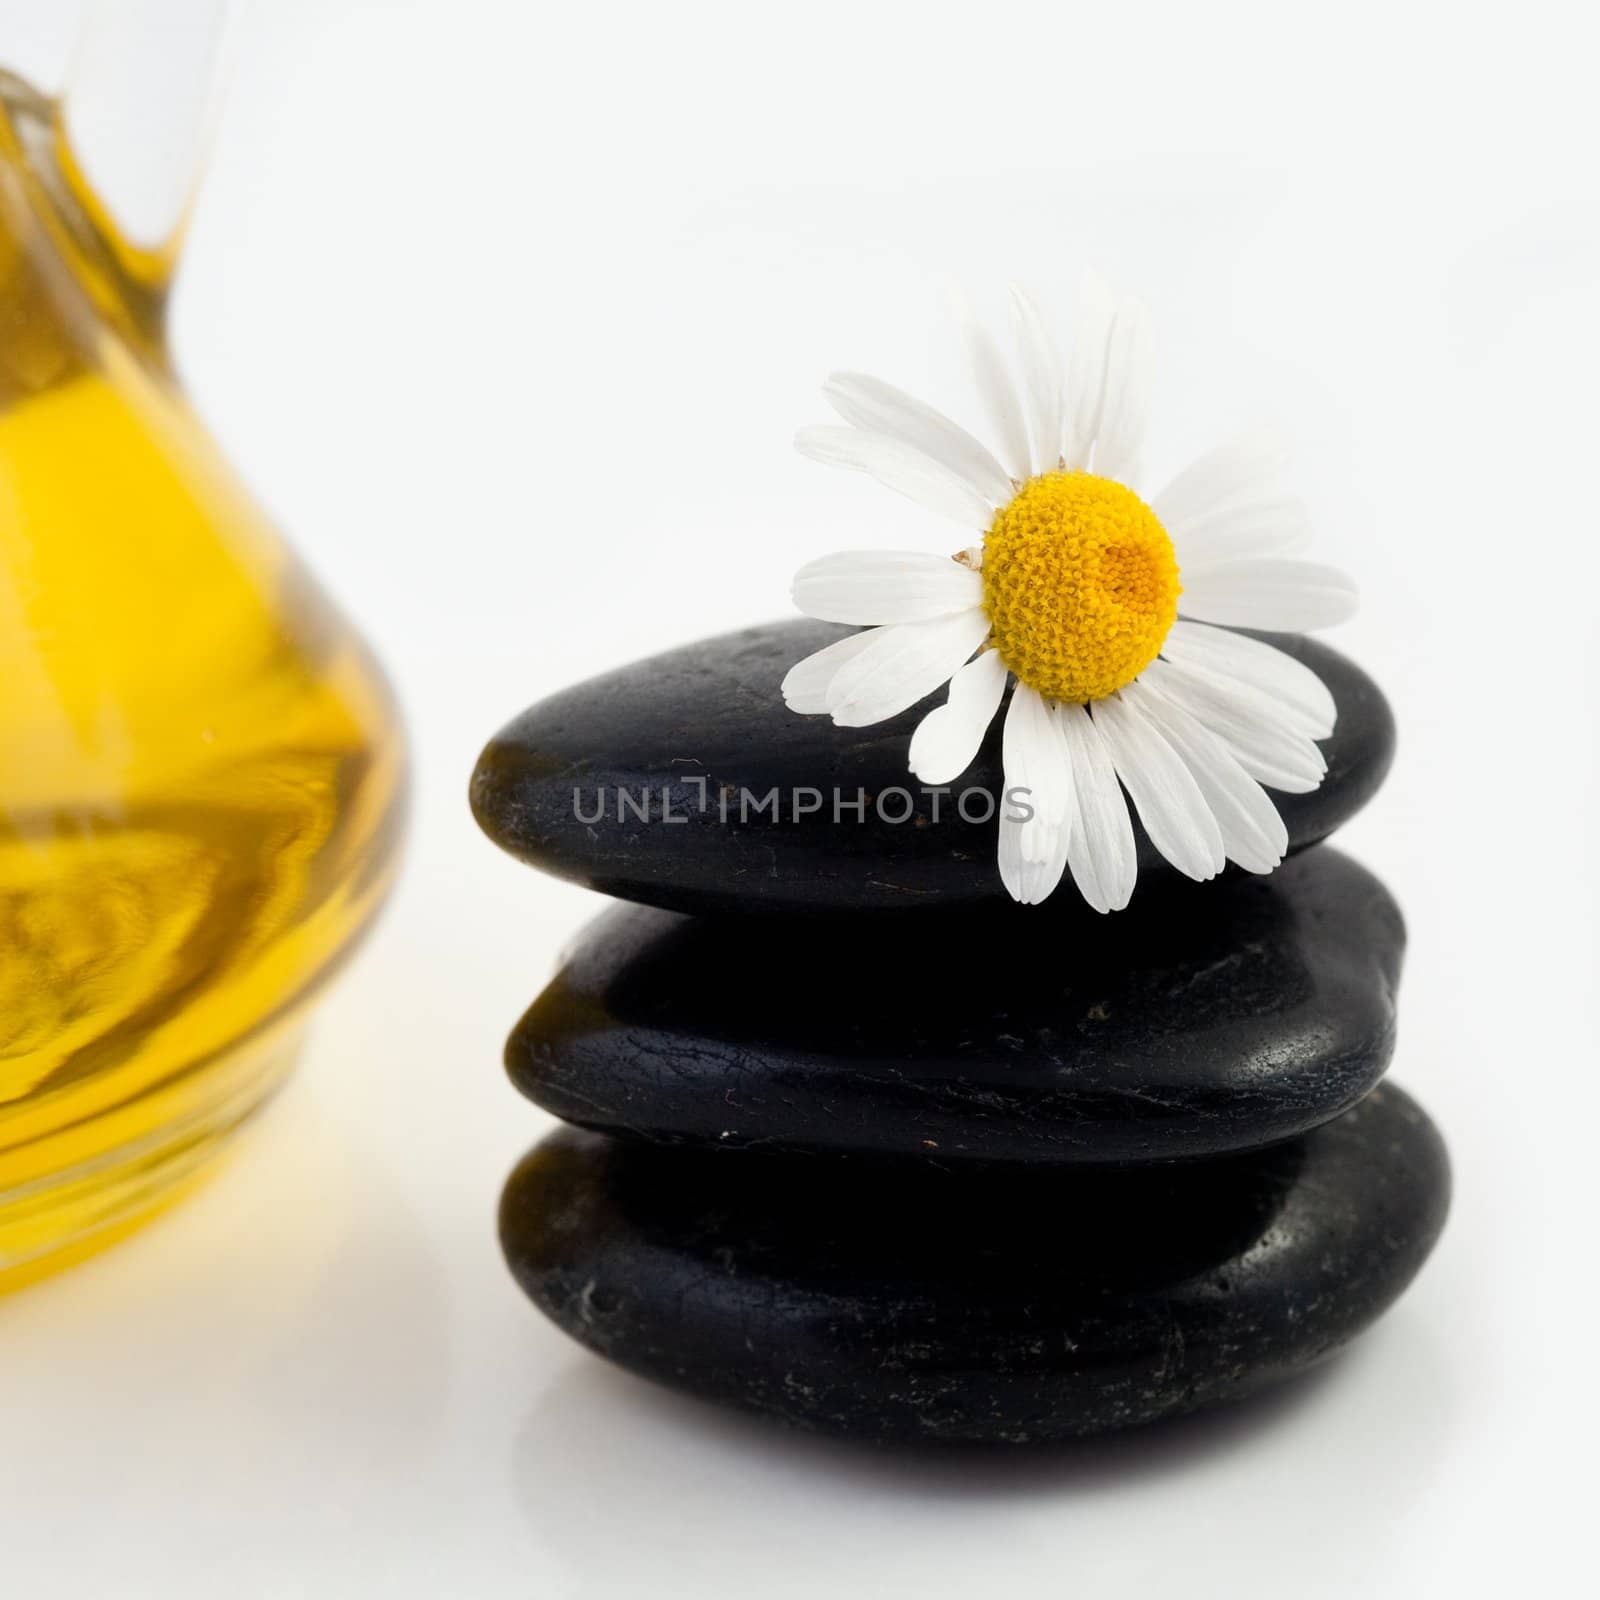 An image of a heap of black stones and flower